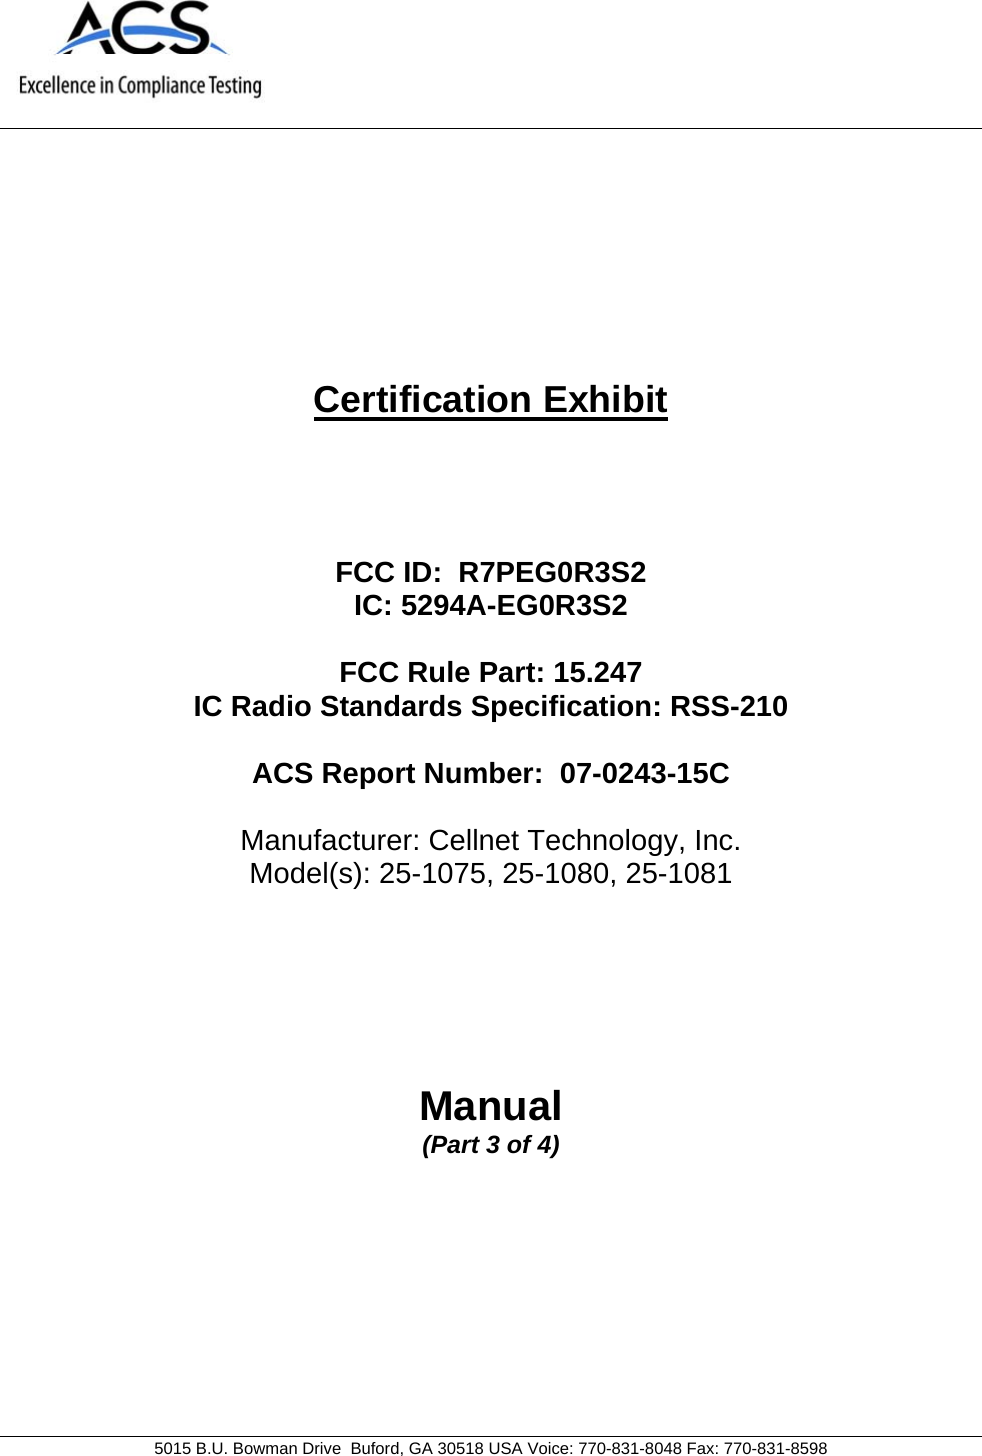     5015 B.U. Bowman Drive  Buford, GA 30518 USA Voice: 770-831-8048 Fax: 770-831-8598   Certification Exhibit     FCC ID:  R7PEG0R3S2 IC: 5294A-EG0R3S2  FCC Rule Part: 15.247 IC Radio Standards Specification: RSS-210  ACS Report Number:  07-0243-15C   Manufacturer: Cellnet Technology, Inc. Model(s): 25-1075, 25-1080, 25-1081     Manual (Part 3 of 4)  